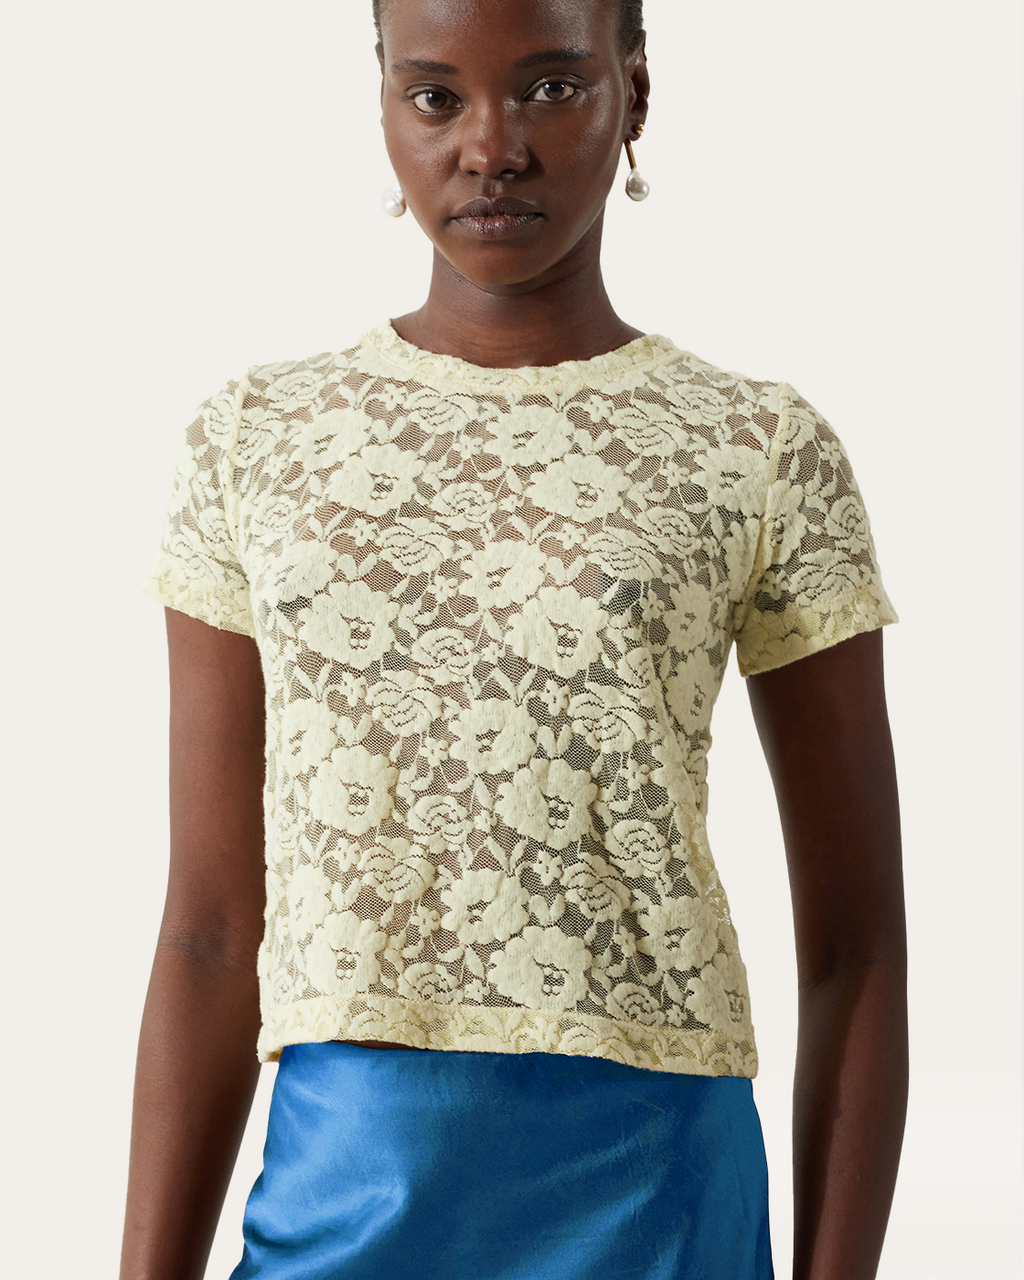 Adina T-Shirt Cotton Blend Floral Lace Yellow - Special Price